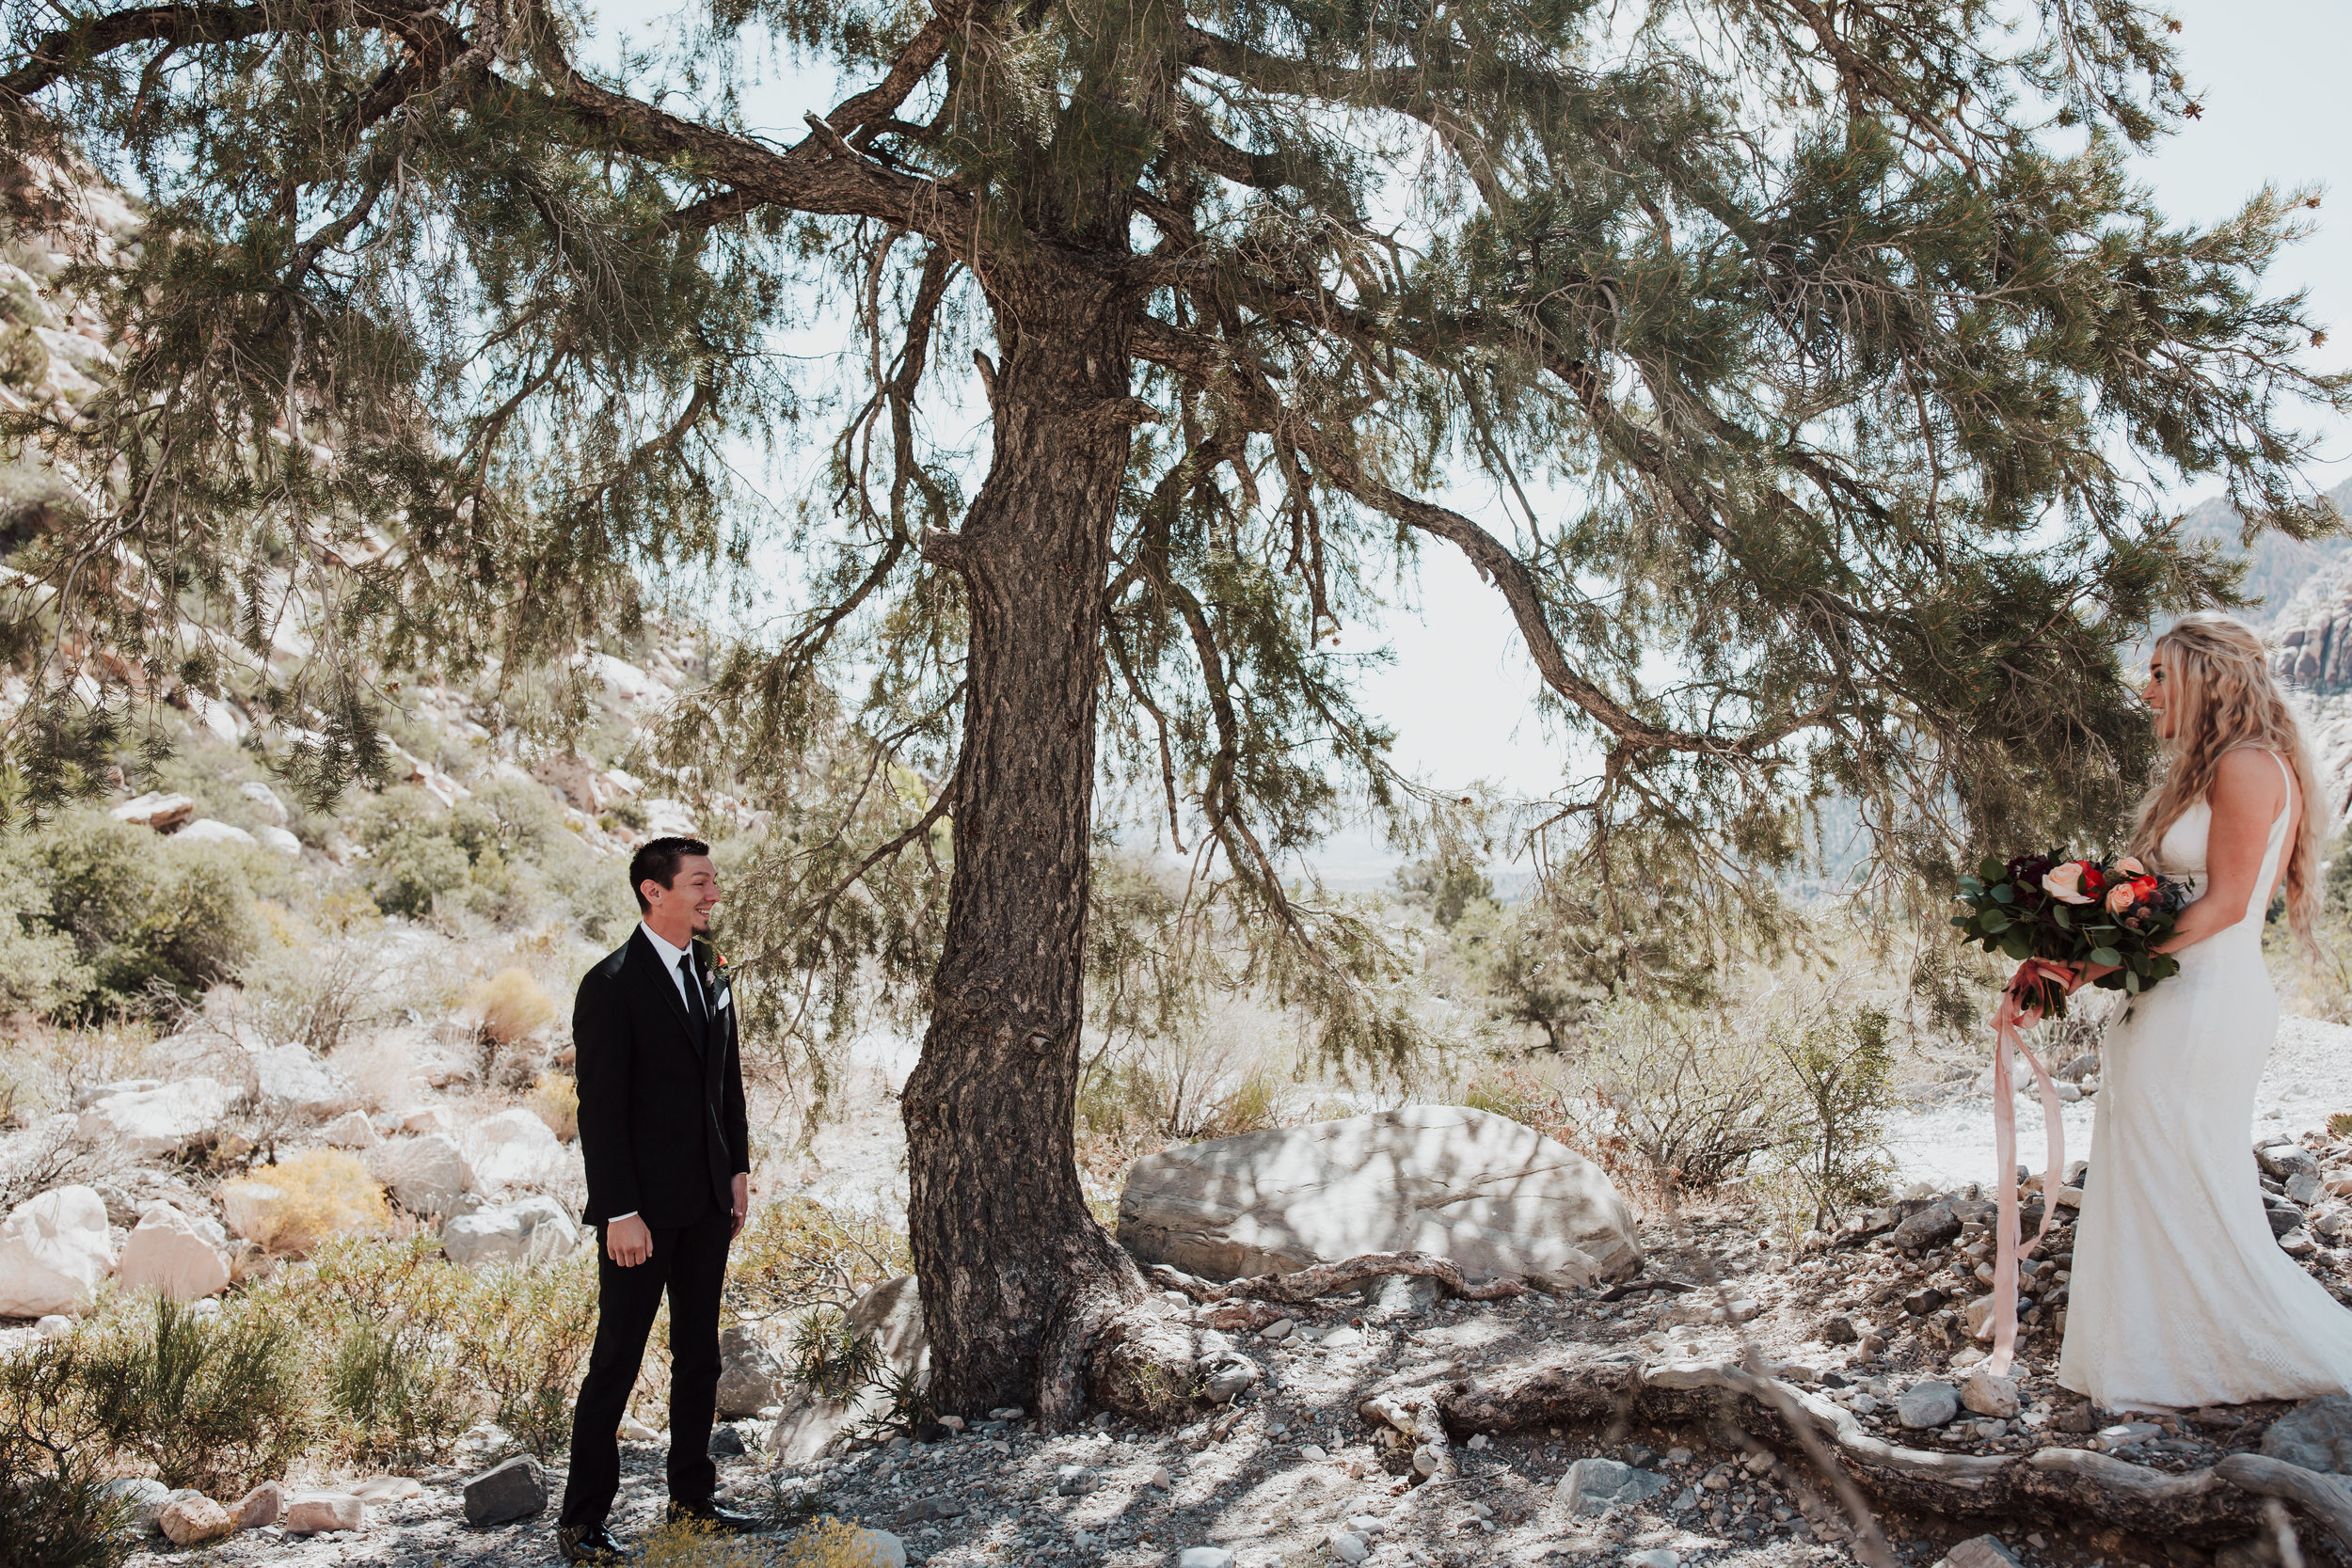 Rustic Bloom Photography | First Look Wedding Inspiration 